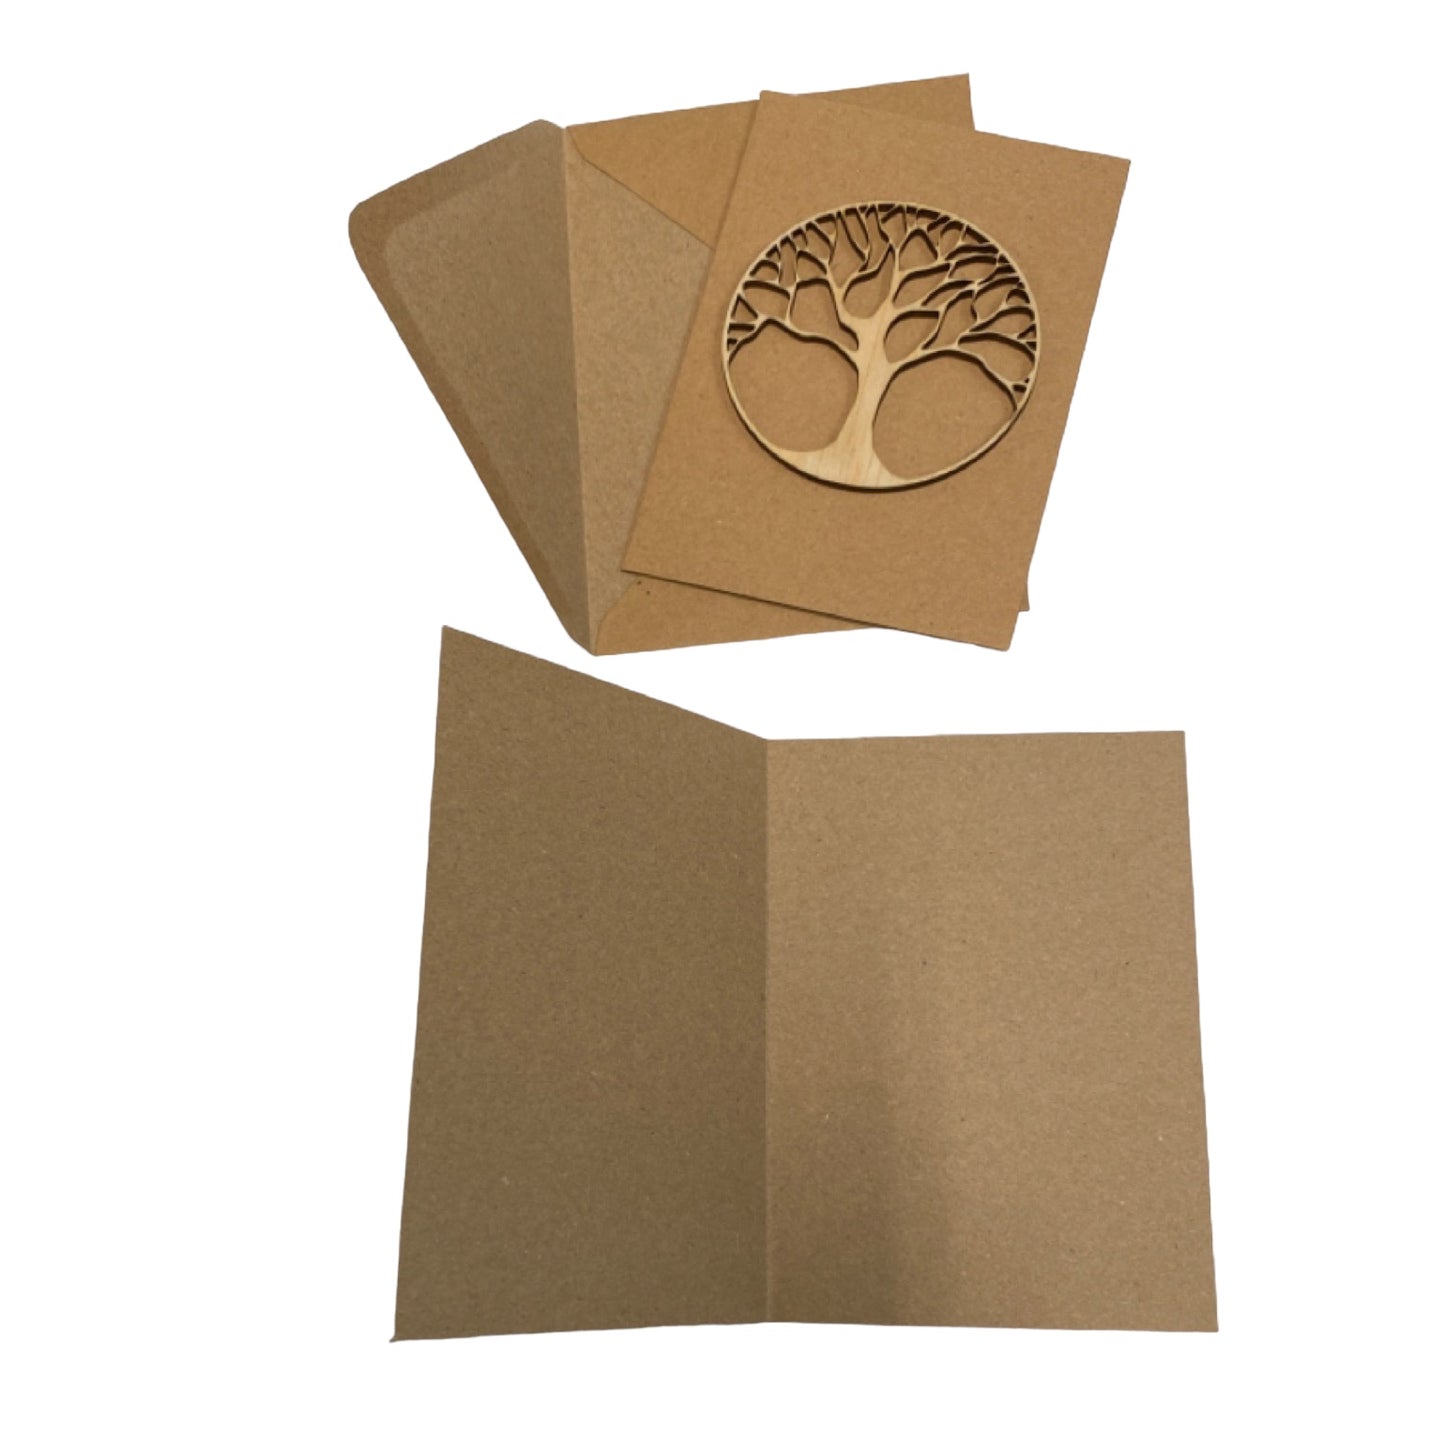 Card Envelope Greeting Set of 5 Him Her - The Renmy Store Homewares & Gifts 